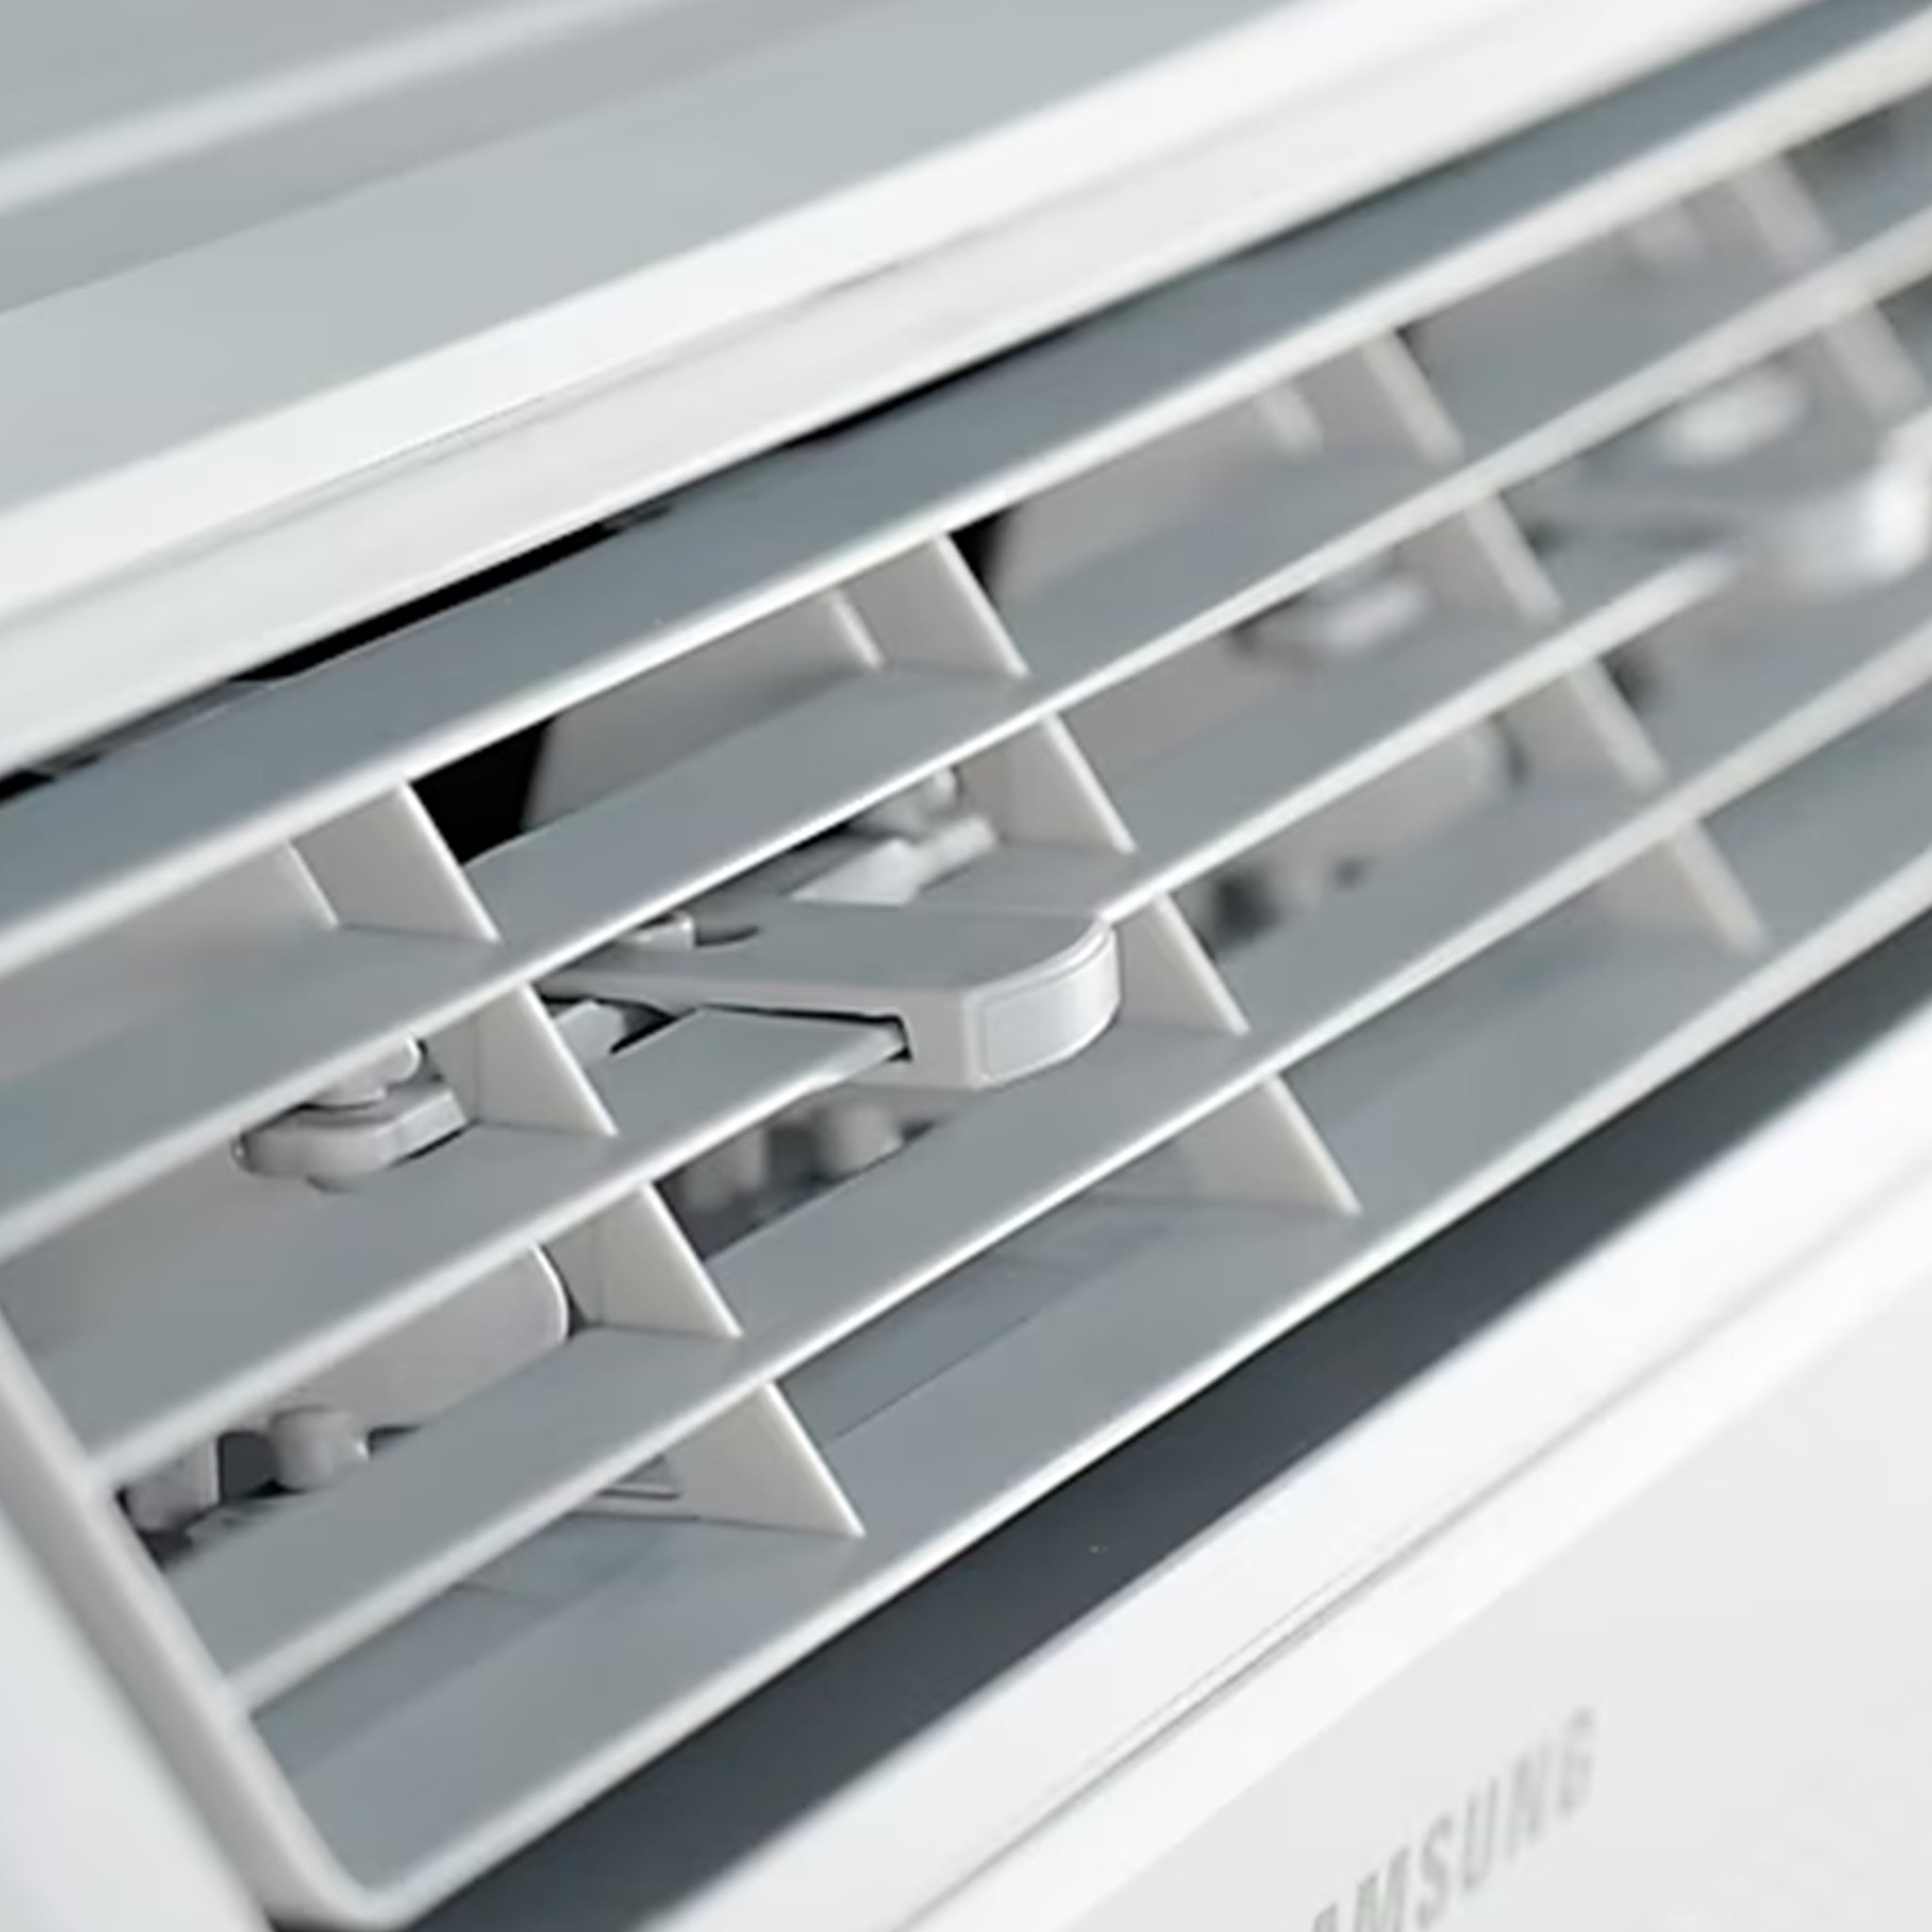 SAMSUNG AWCGHLAWKNTC Window-type Compact Air Conditioner Samsung